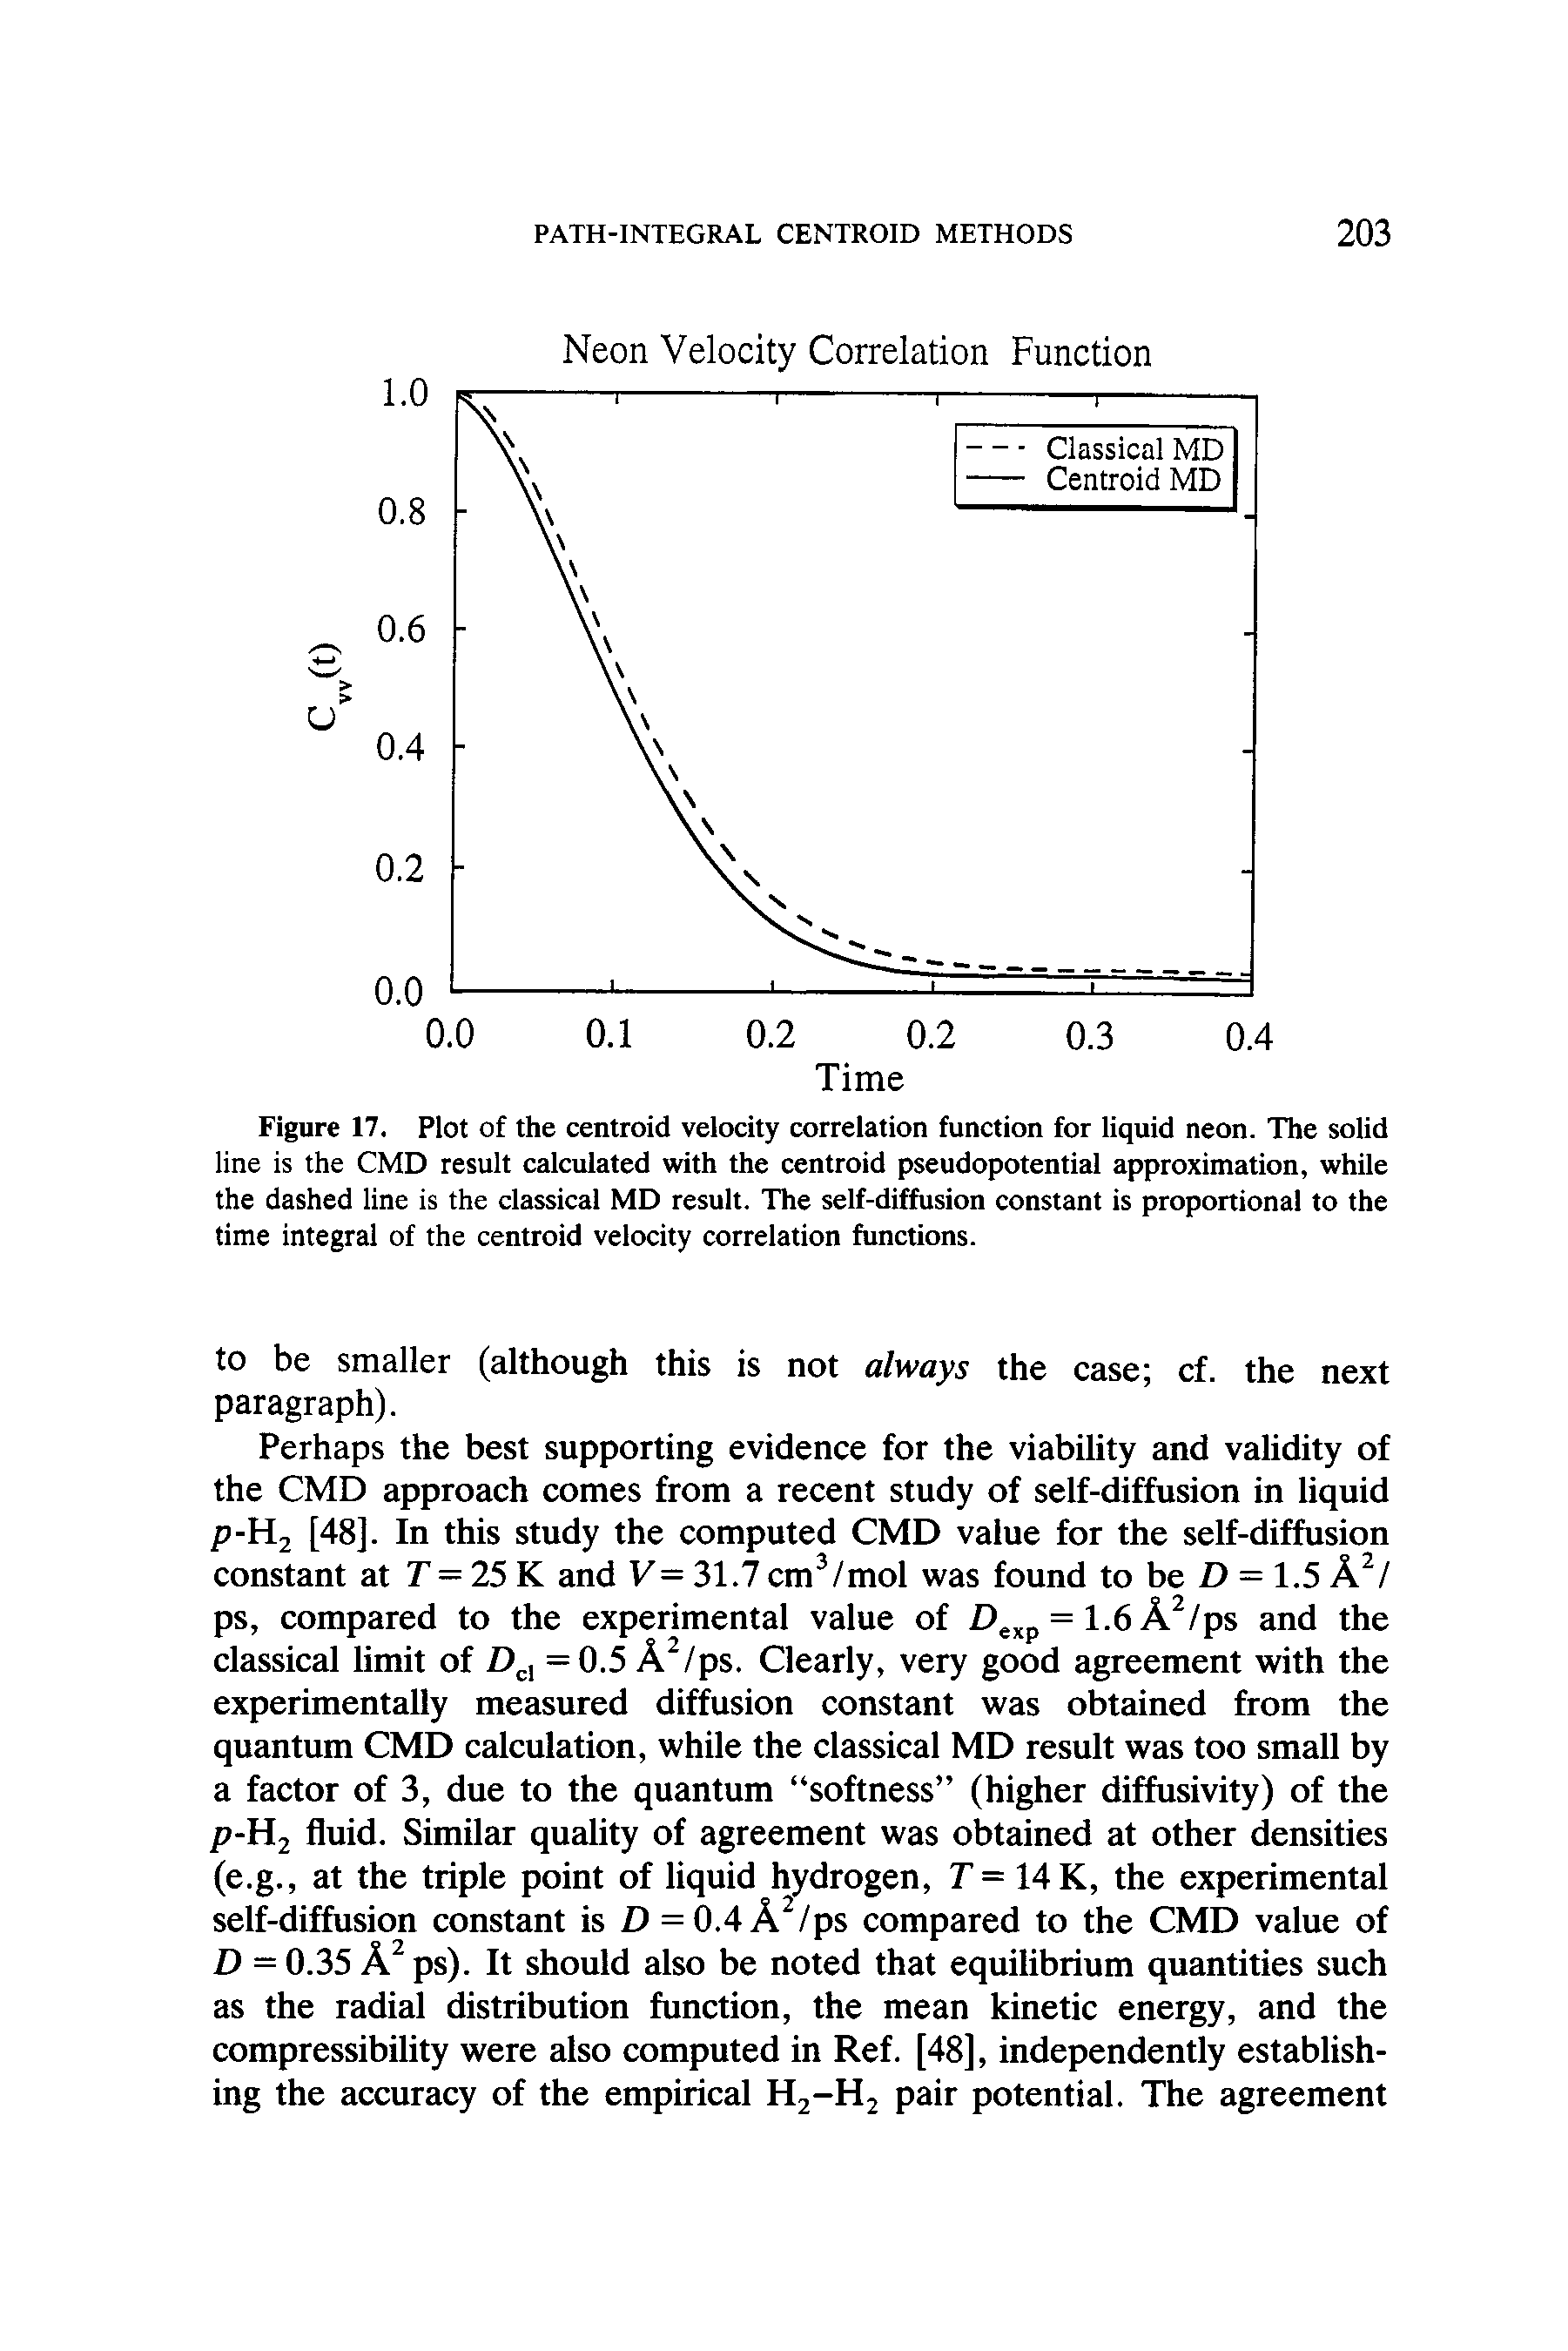 Figure 17. Plot of the centroid velocity correlation function for liquid neon. The solid line is the CMD result calculated with the centroid pseudopotential approximation, while the dashed line is the classical MD result. The self-diffusion constant is proportional to the time integral of the centroid velocity correlation functions.